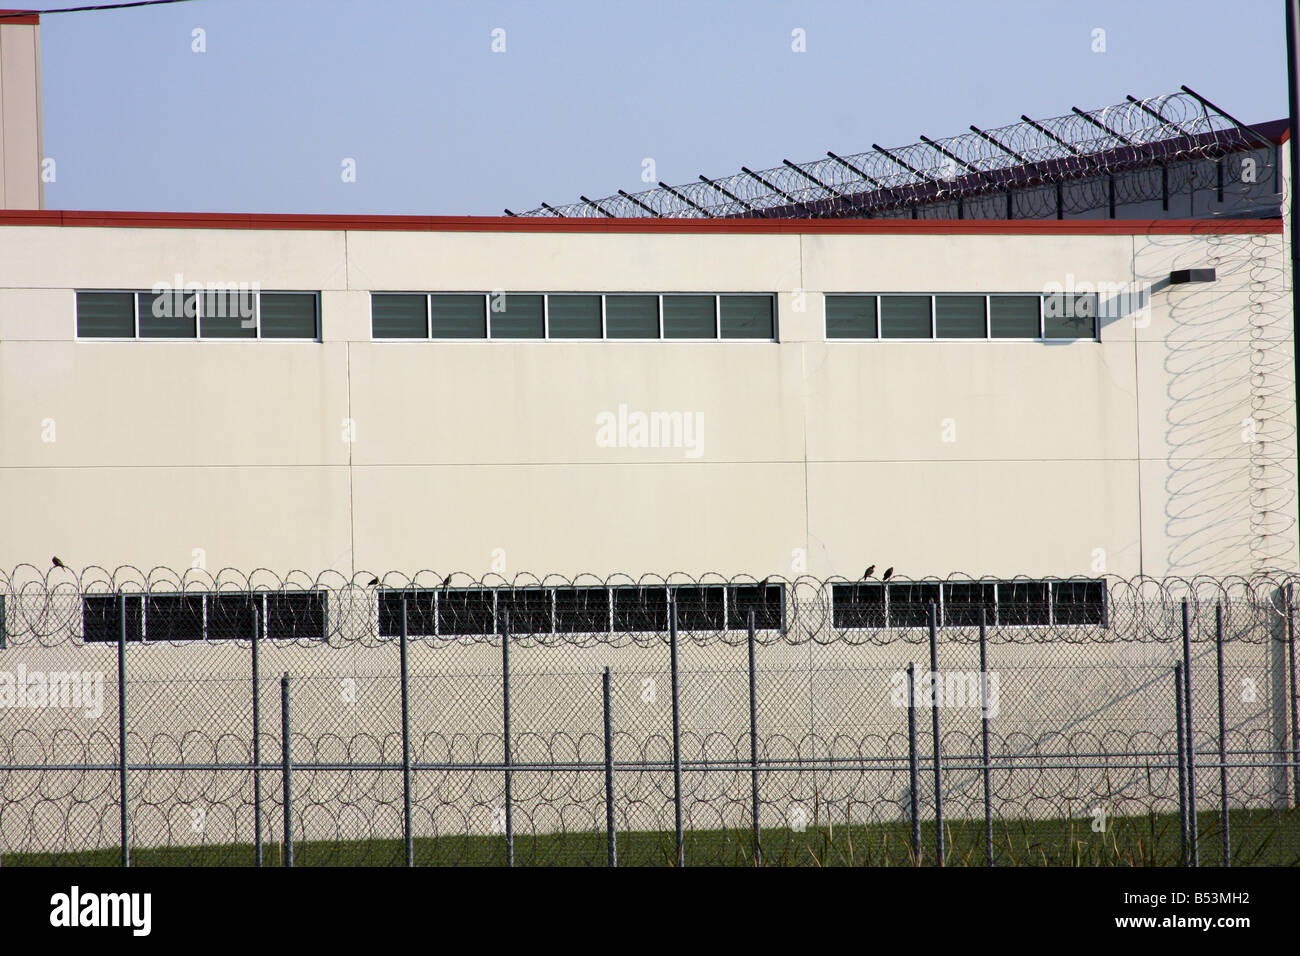 A prison barrier fence Stock Photo